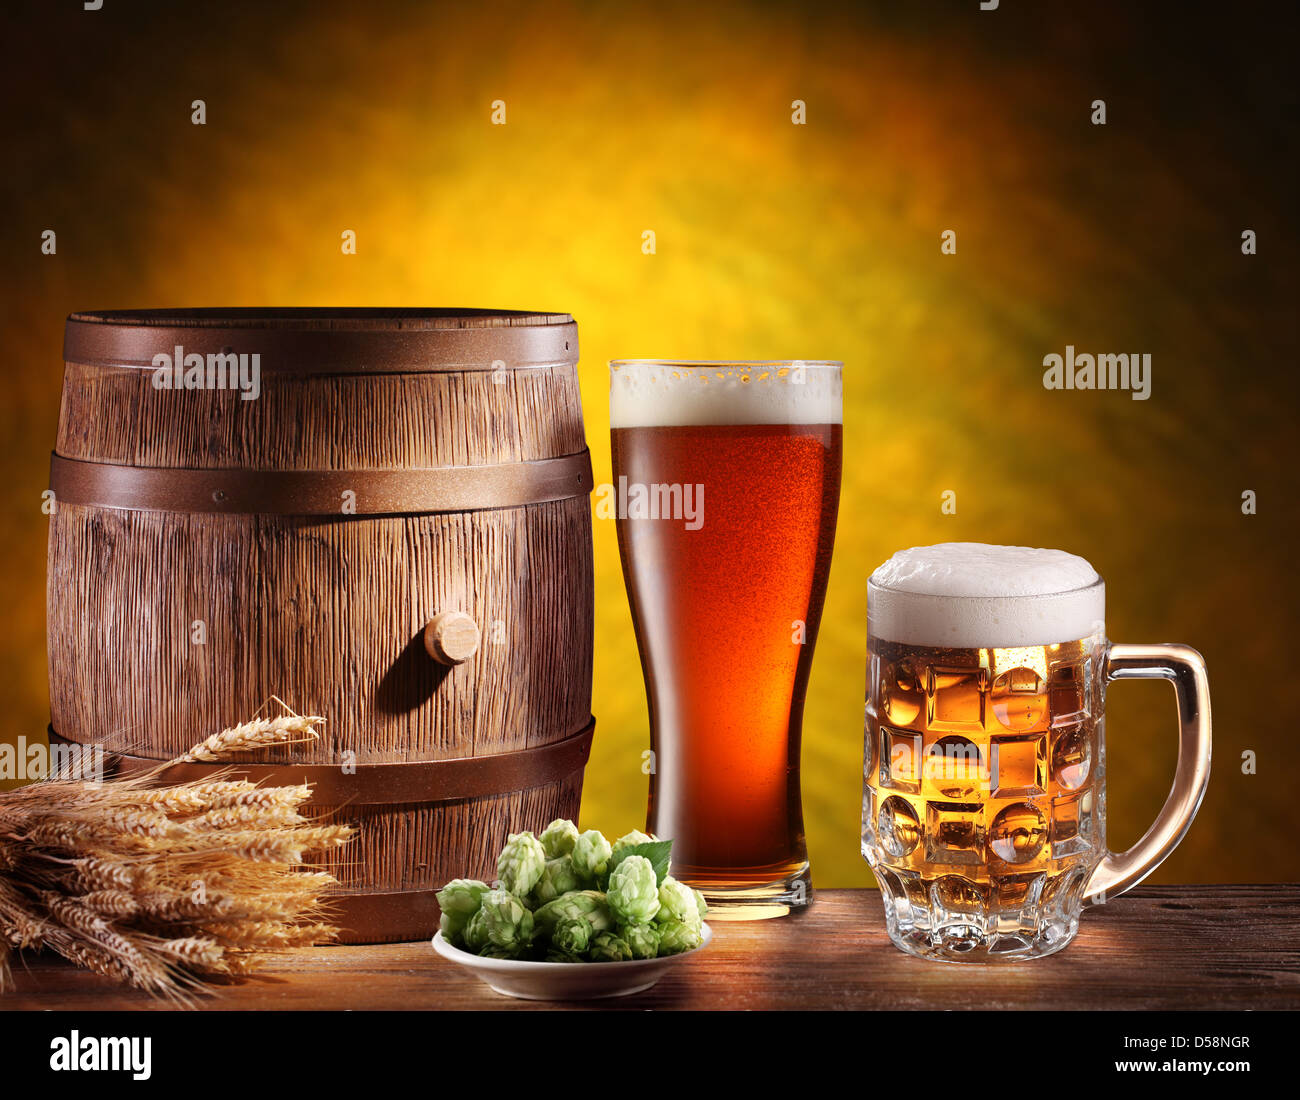 Beer glasses with a wooden barrel. Background - dark yellow gradient. Stock Photo